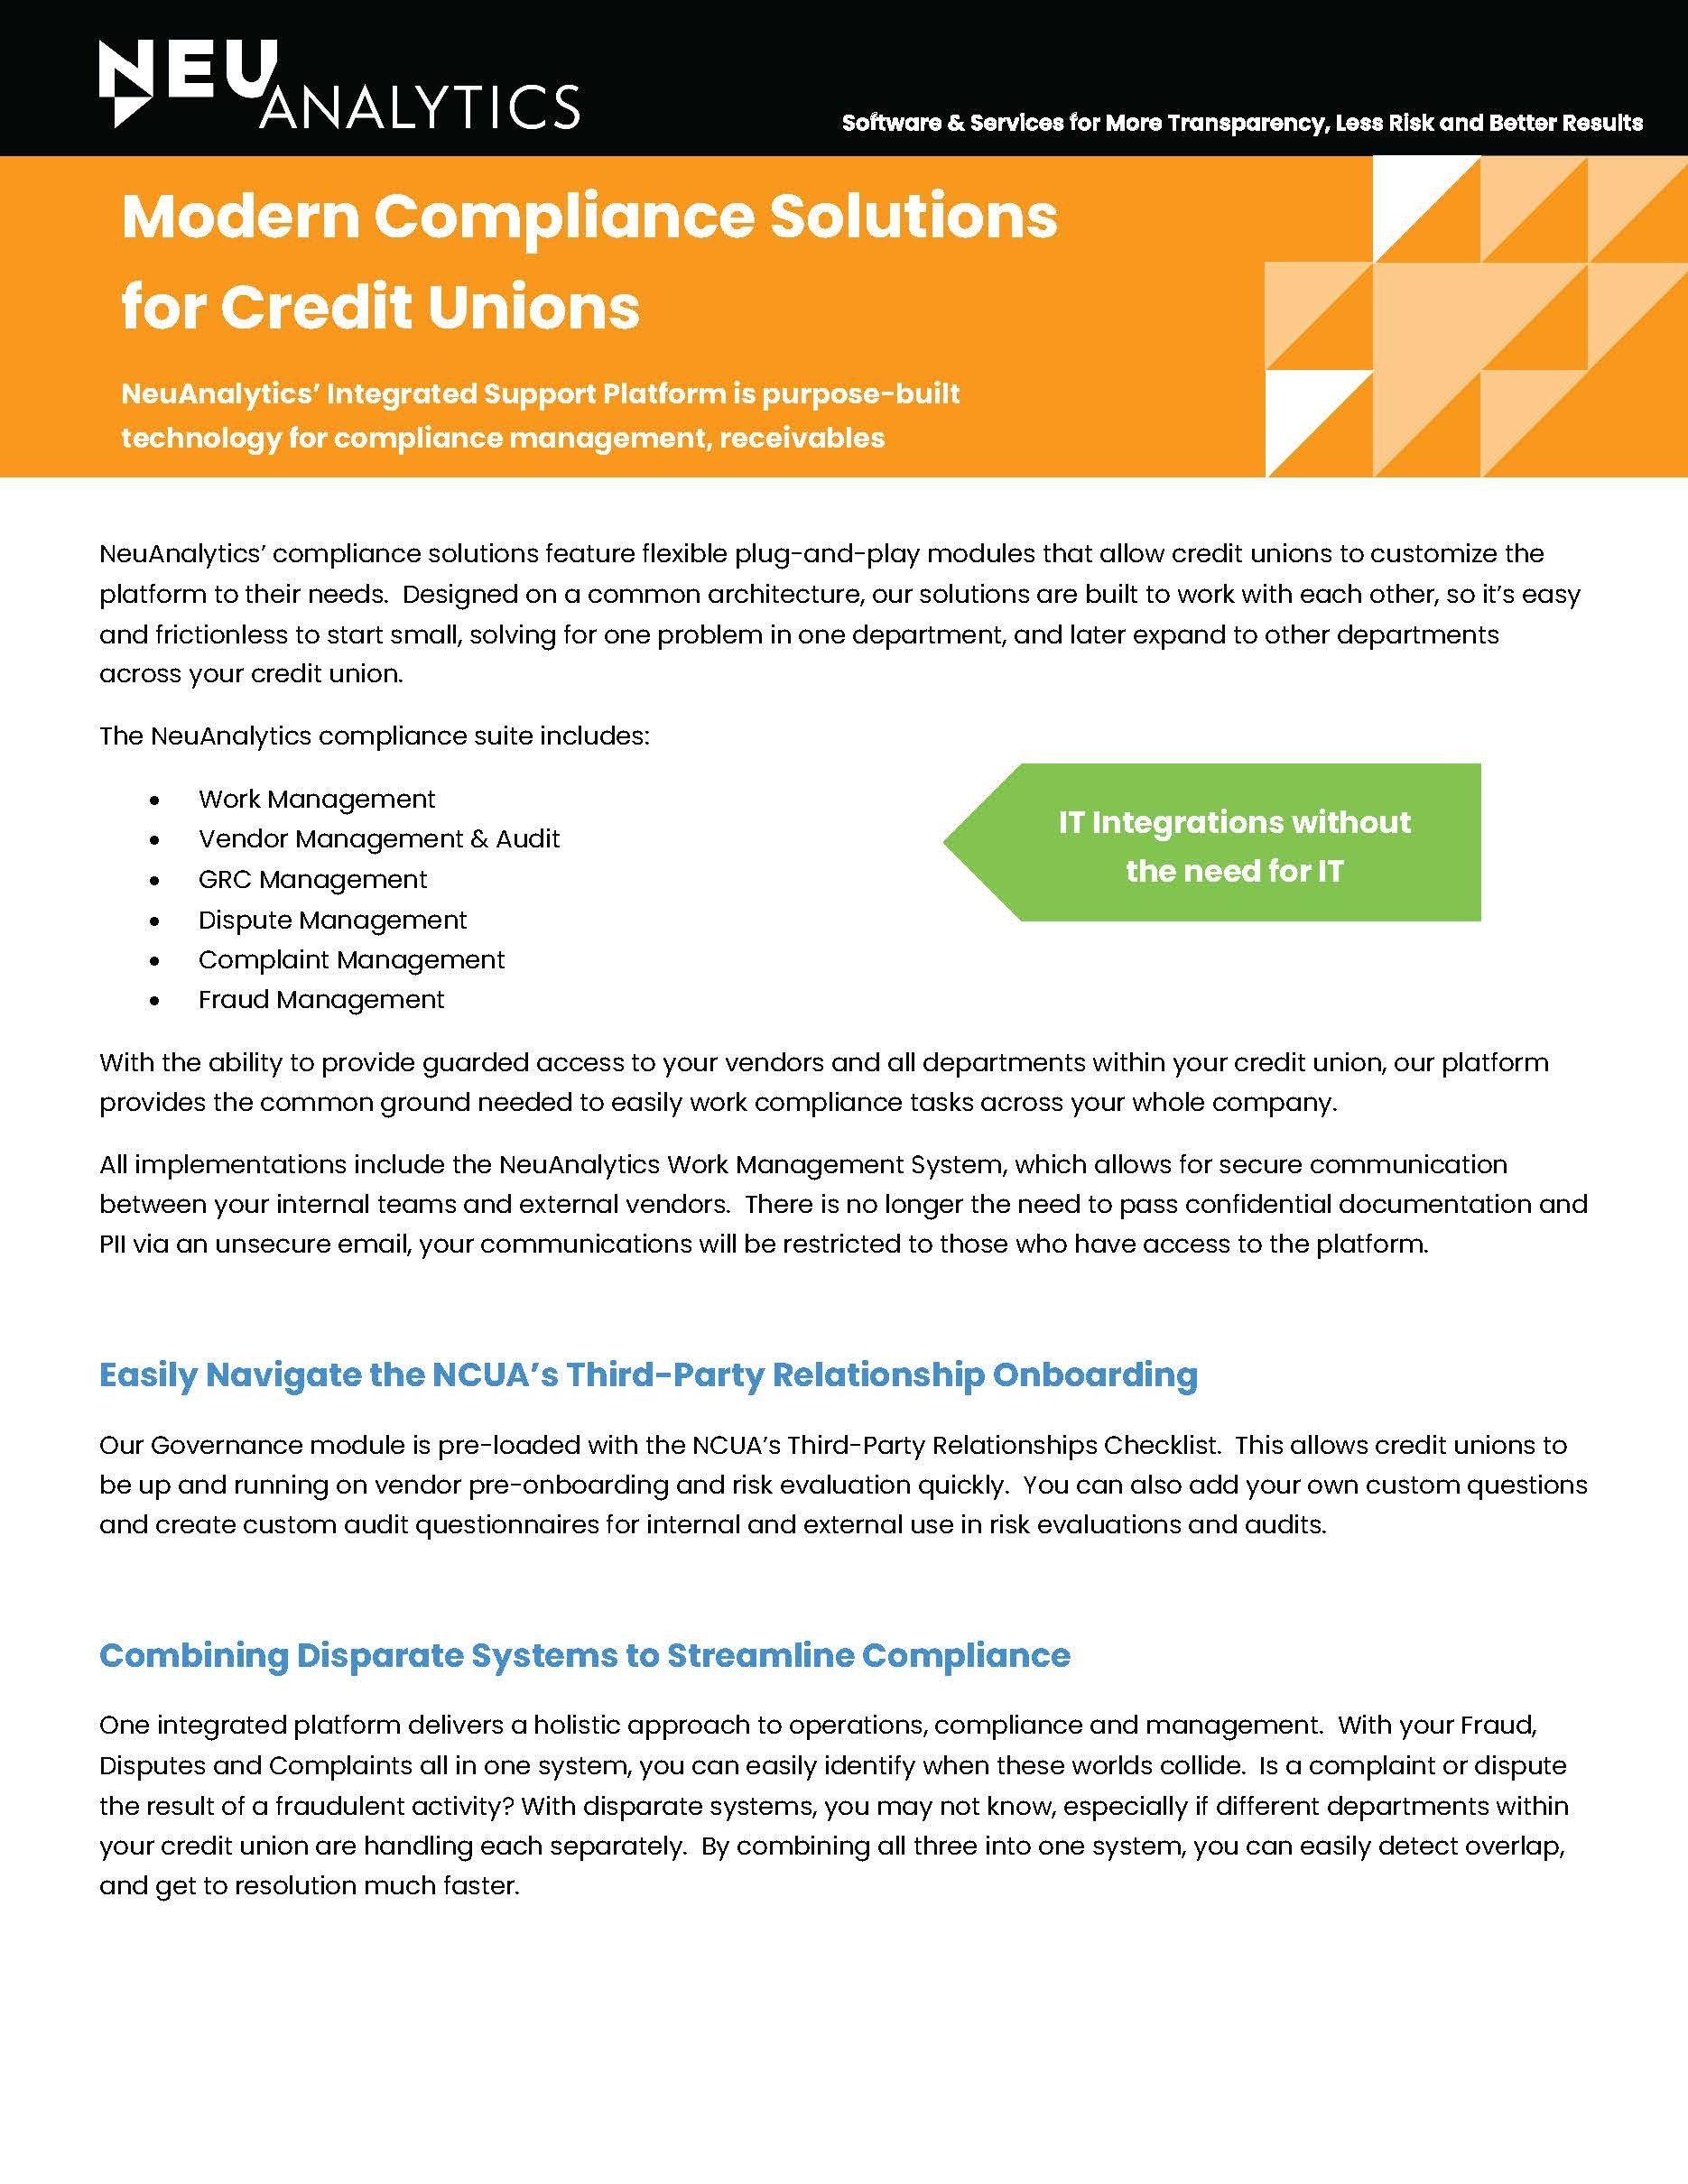 Modern Compliance Solutions for Credit Unions